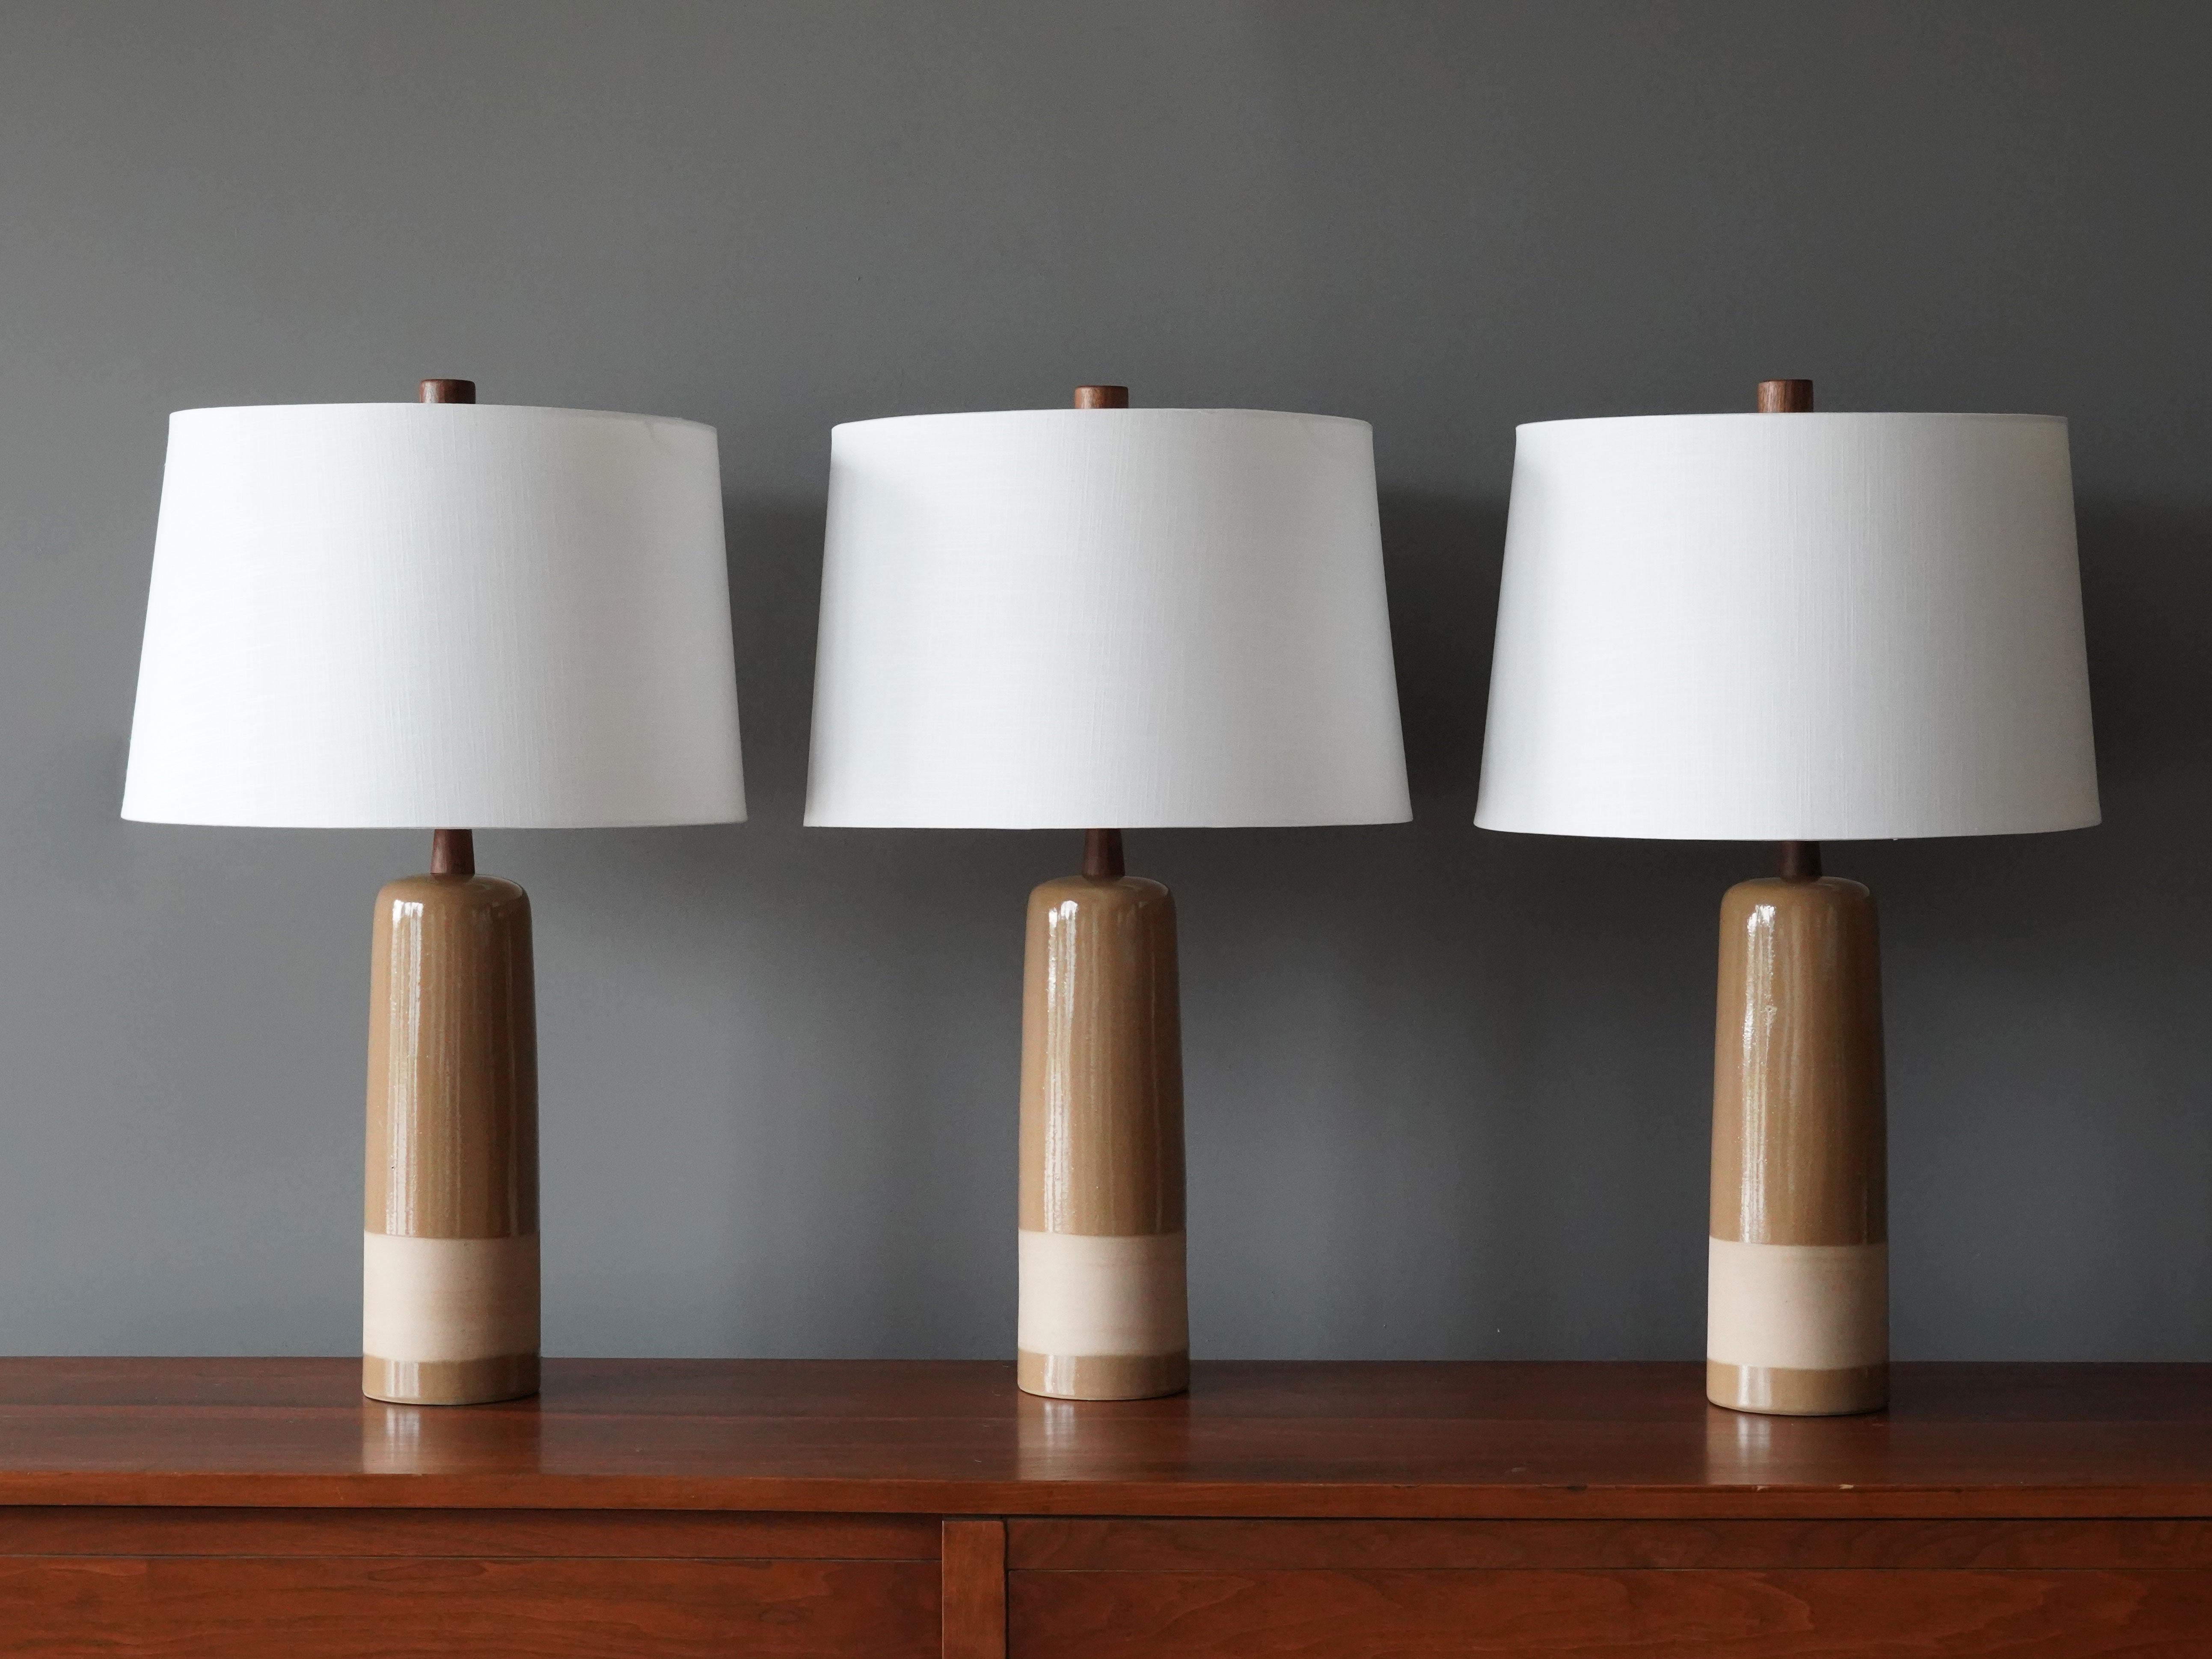 Table lamps designed by husband and wife duo Jane & Gordon Martz. Produced by Marshall Studios, Indianapolis. 

The bases are slip-cast and then dipped into glaze and hand painted. Design also incorporates exquisite walnut necks and finials. Bases